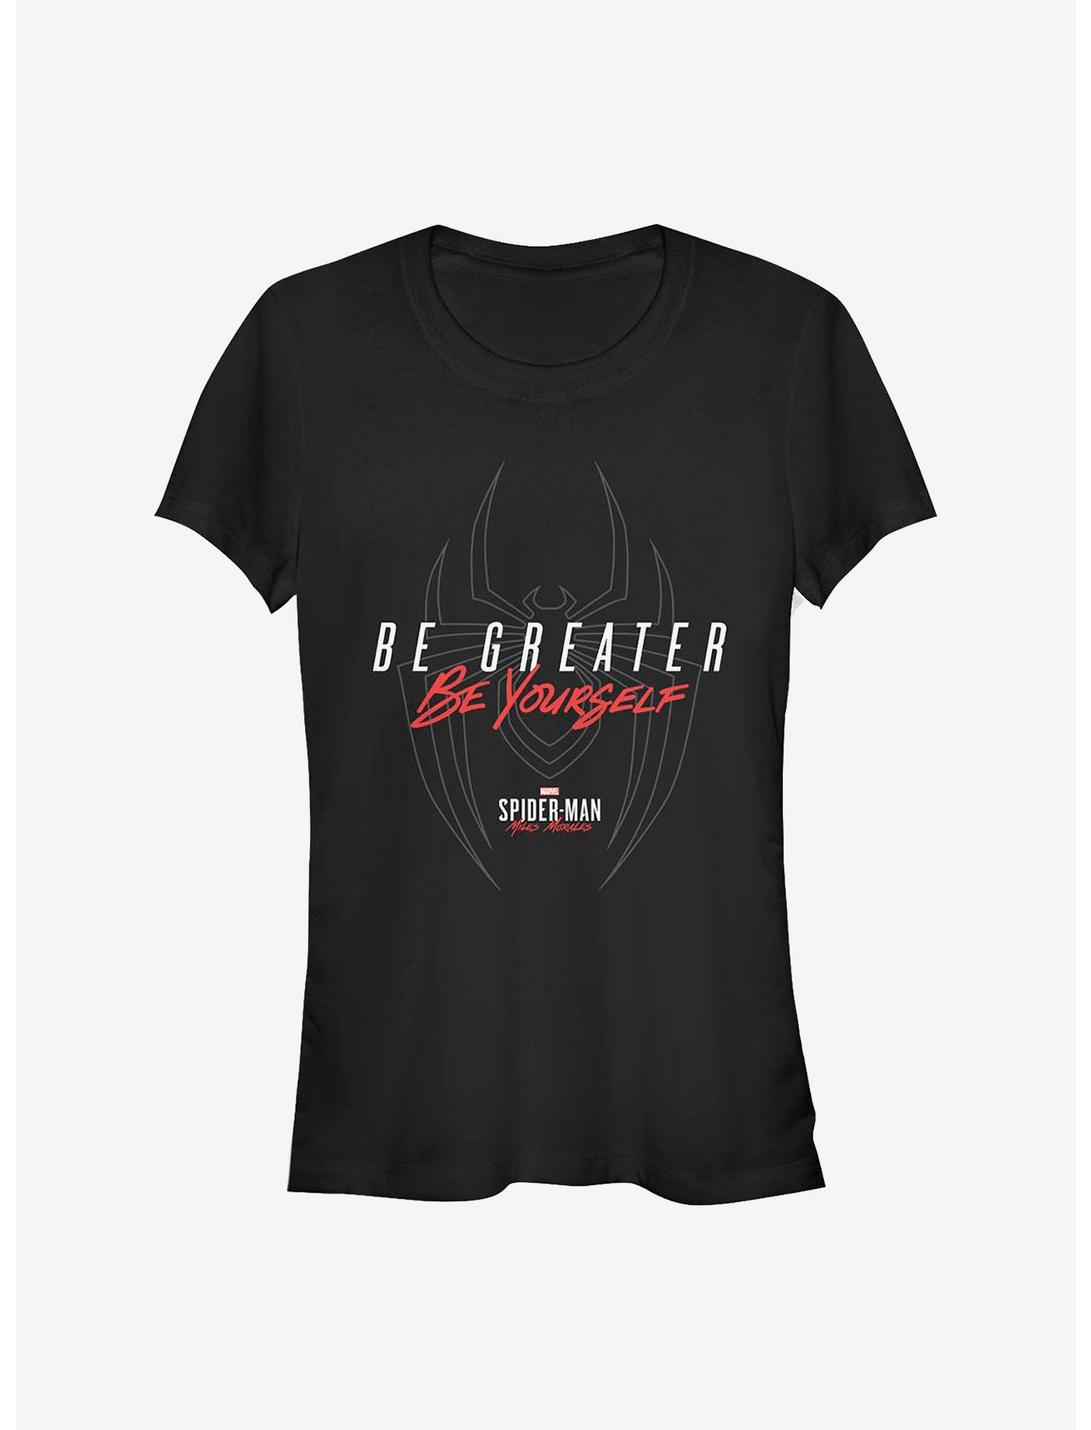 Marvel Spider-Man Miles Morales Be Greater Be Yourself Girls T-Shirt, BLACK, hi-res